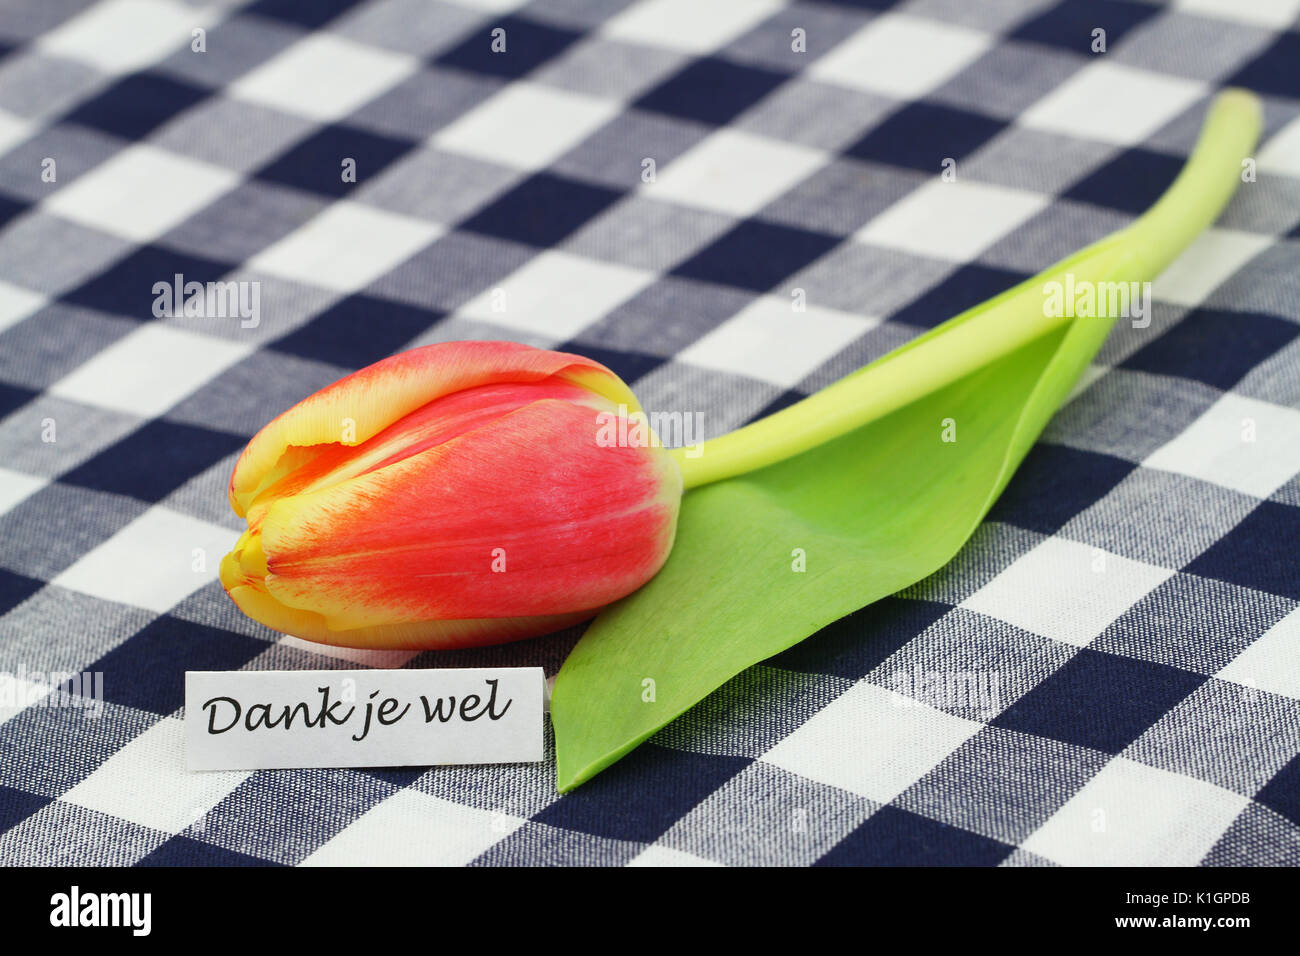 Dank je wel (which means thank you in Dutch) card with red tulip on checkered surface Stock Photo